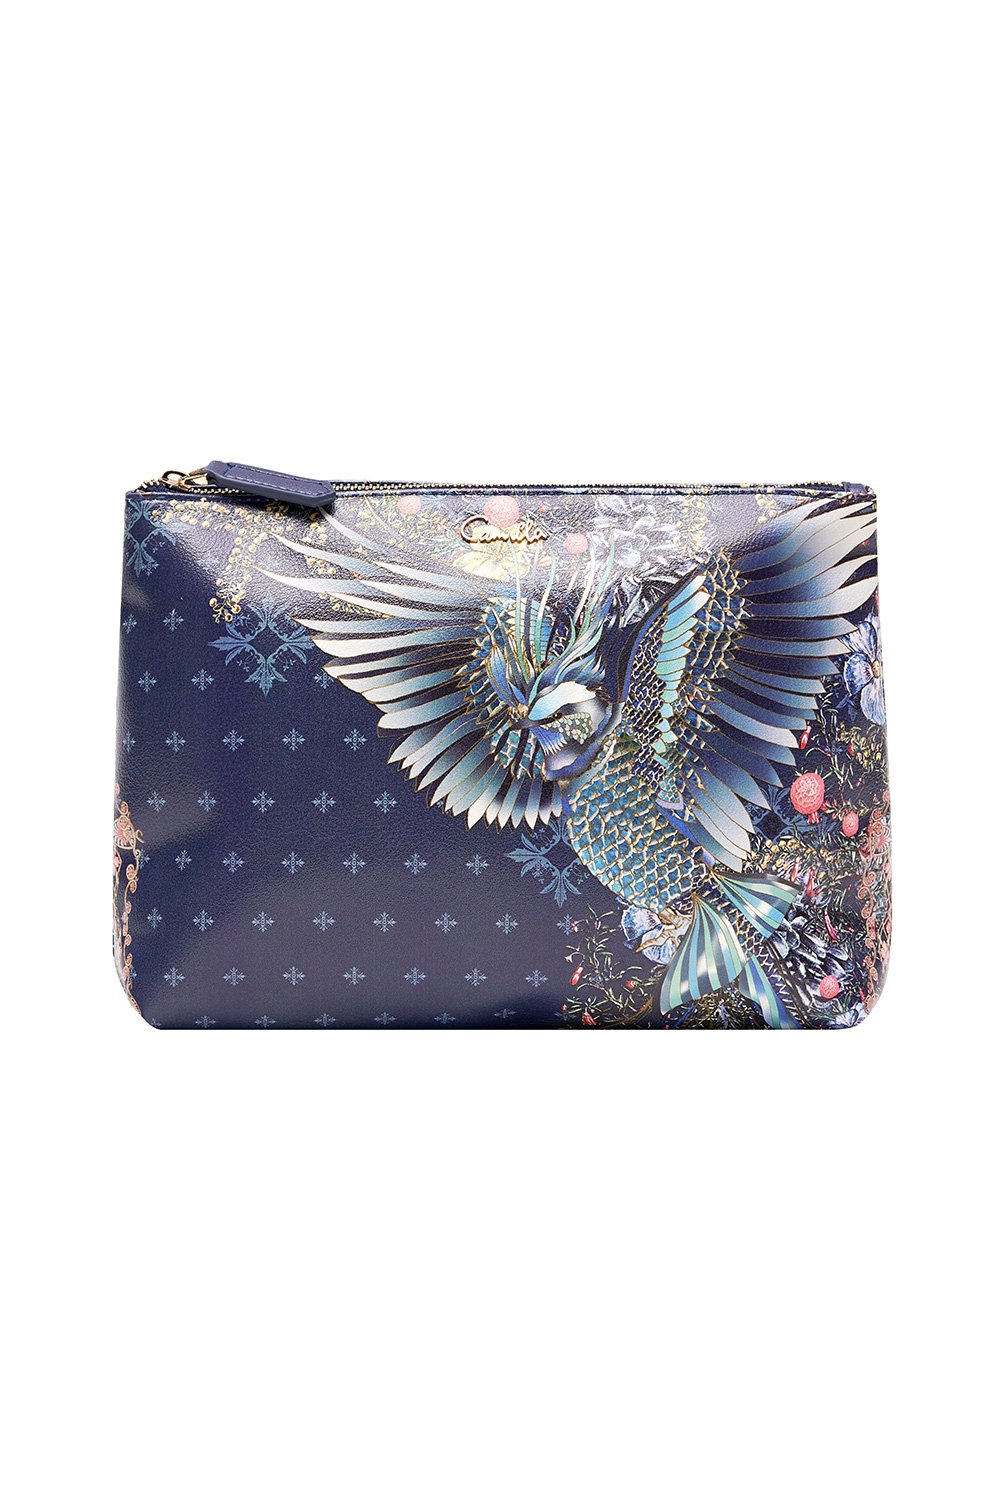 LARGE MAKEUP POUCH SOUTHERN TWILIGHT